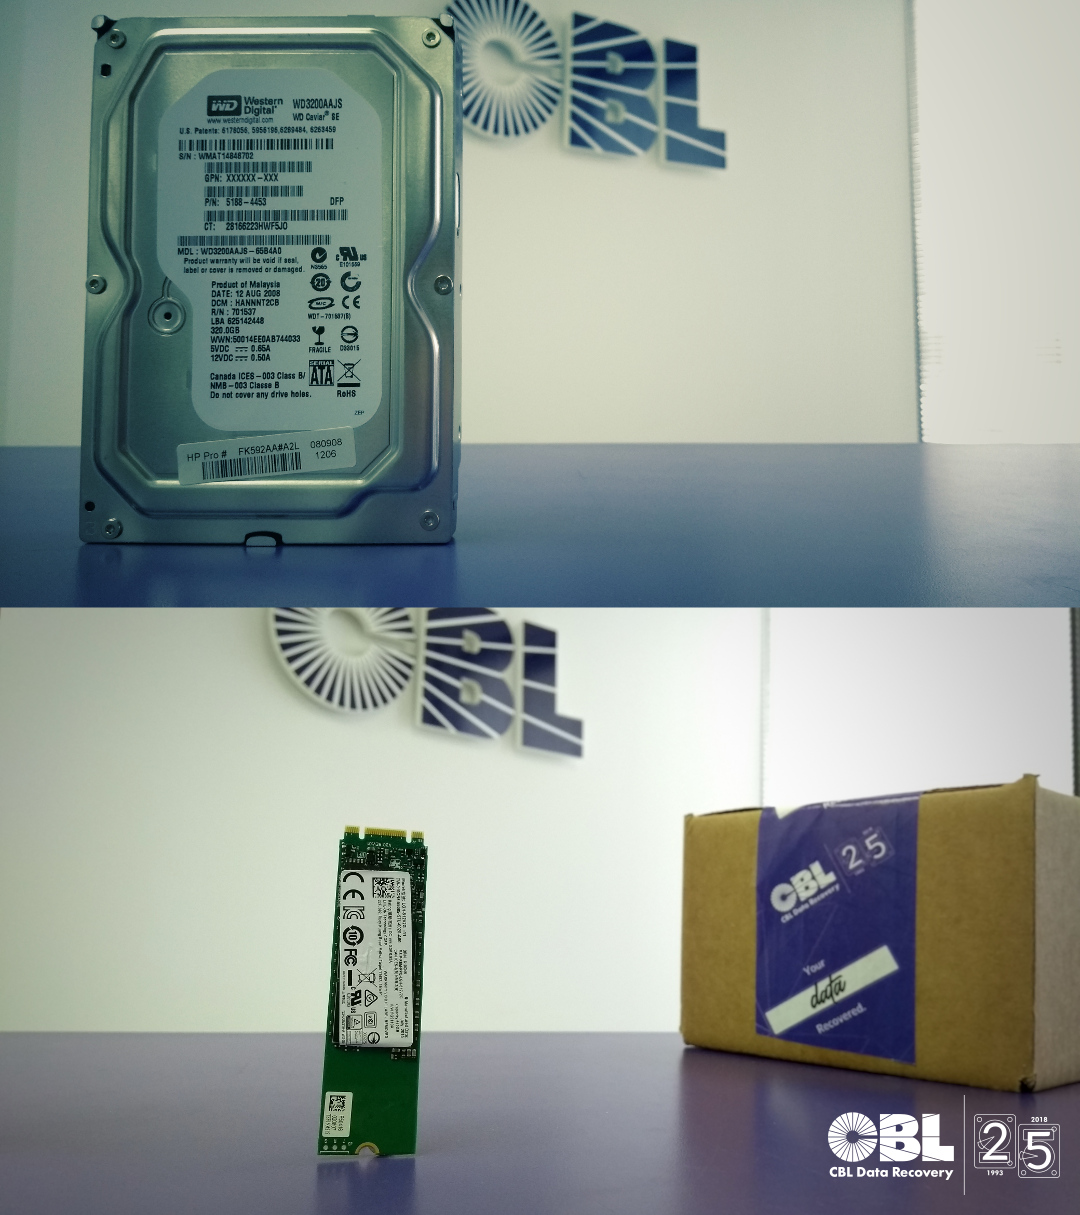 CBL Data Recovery #10YearChallenge HDD 2009 SSD 2019